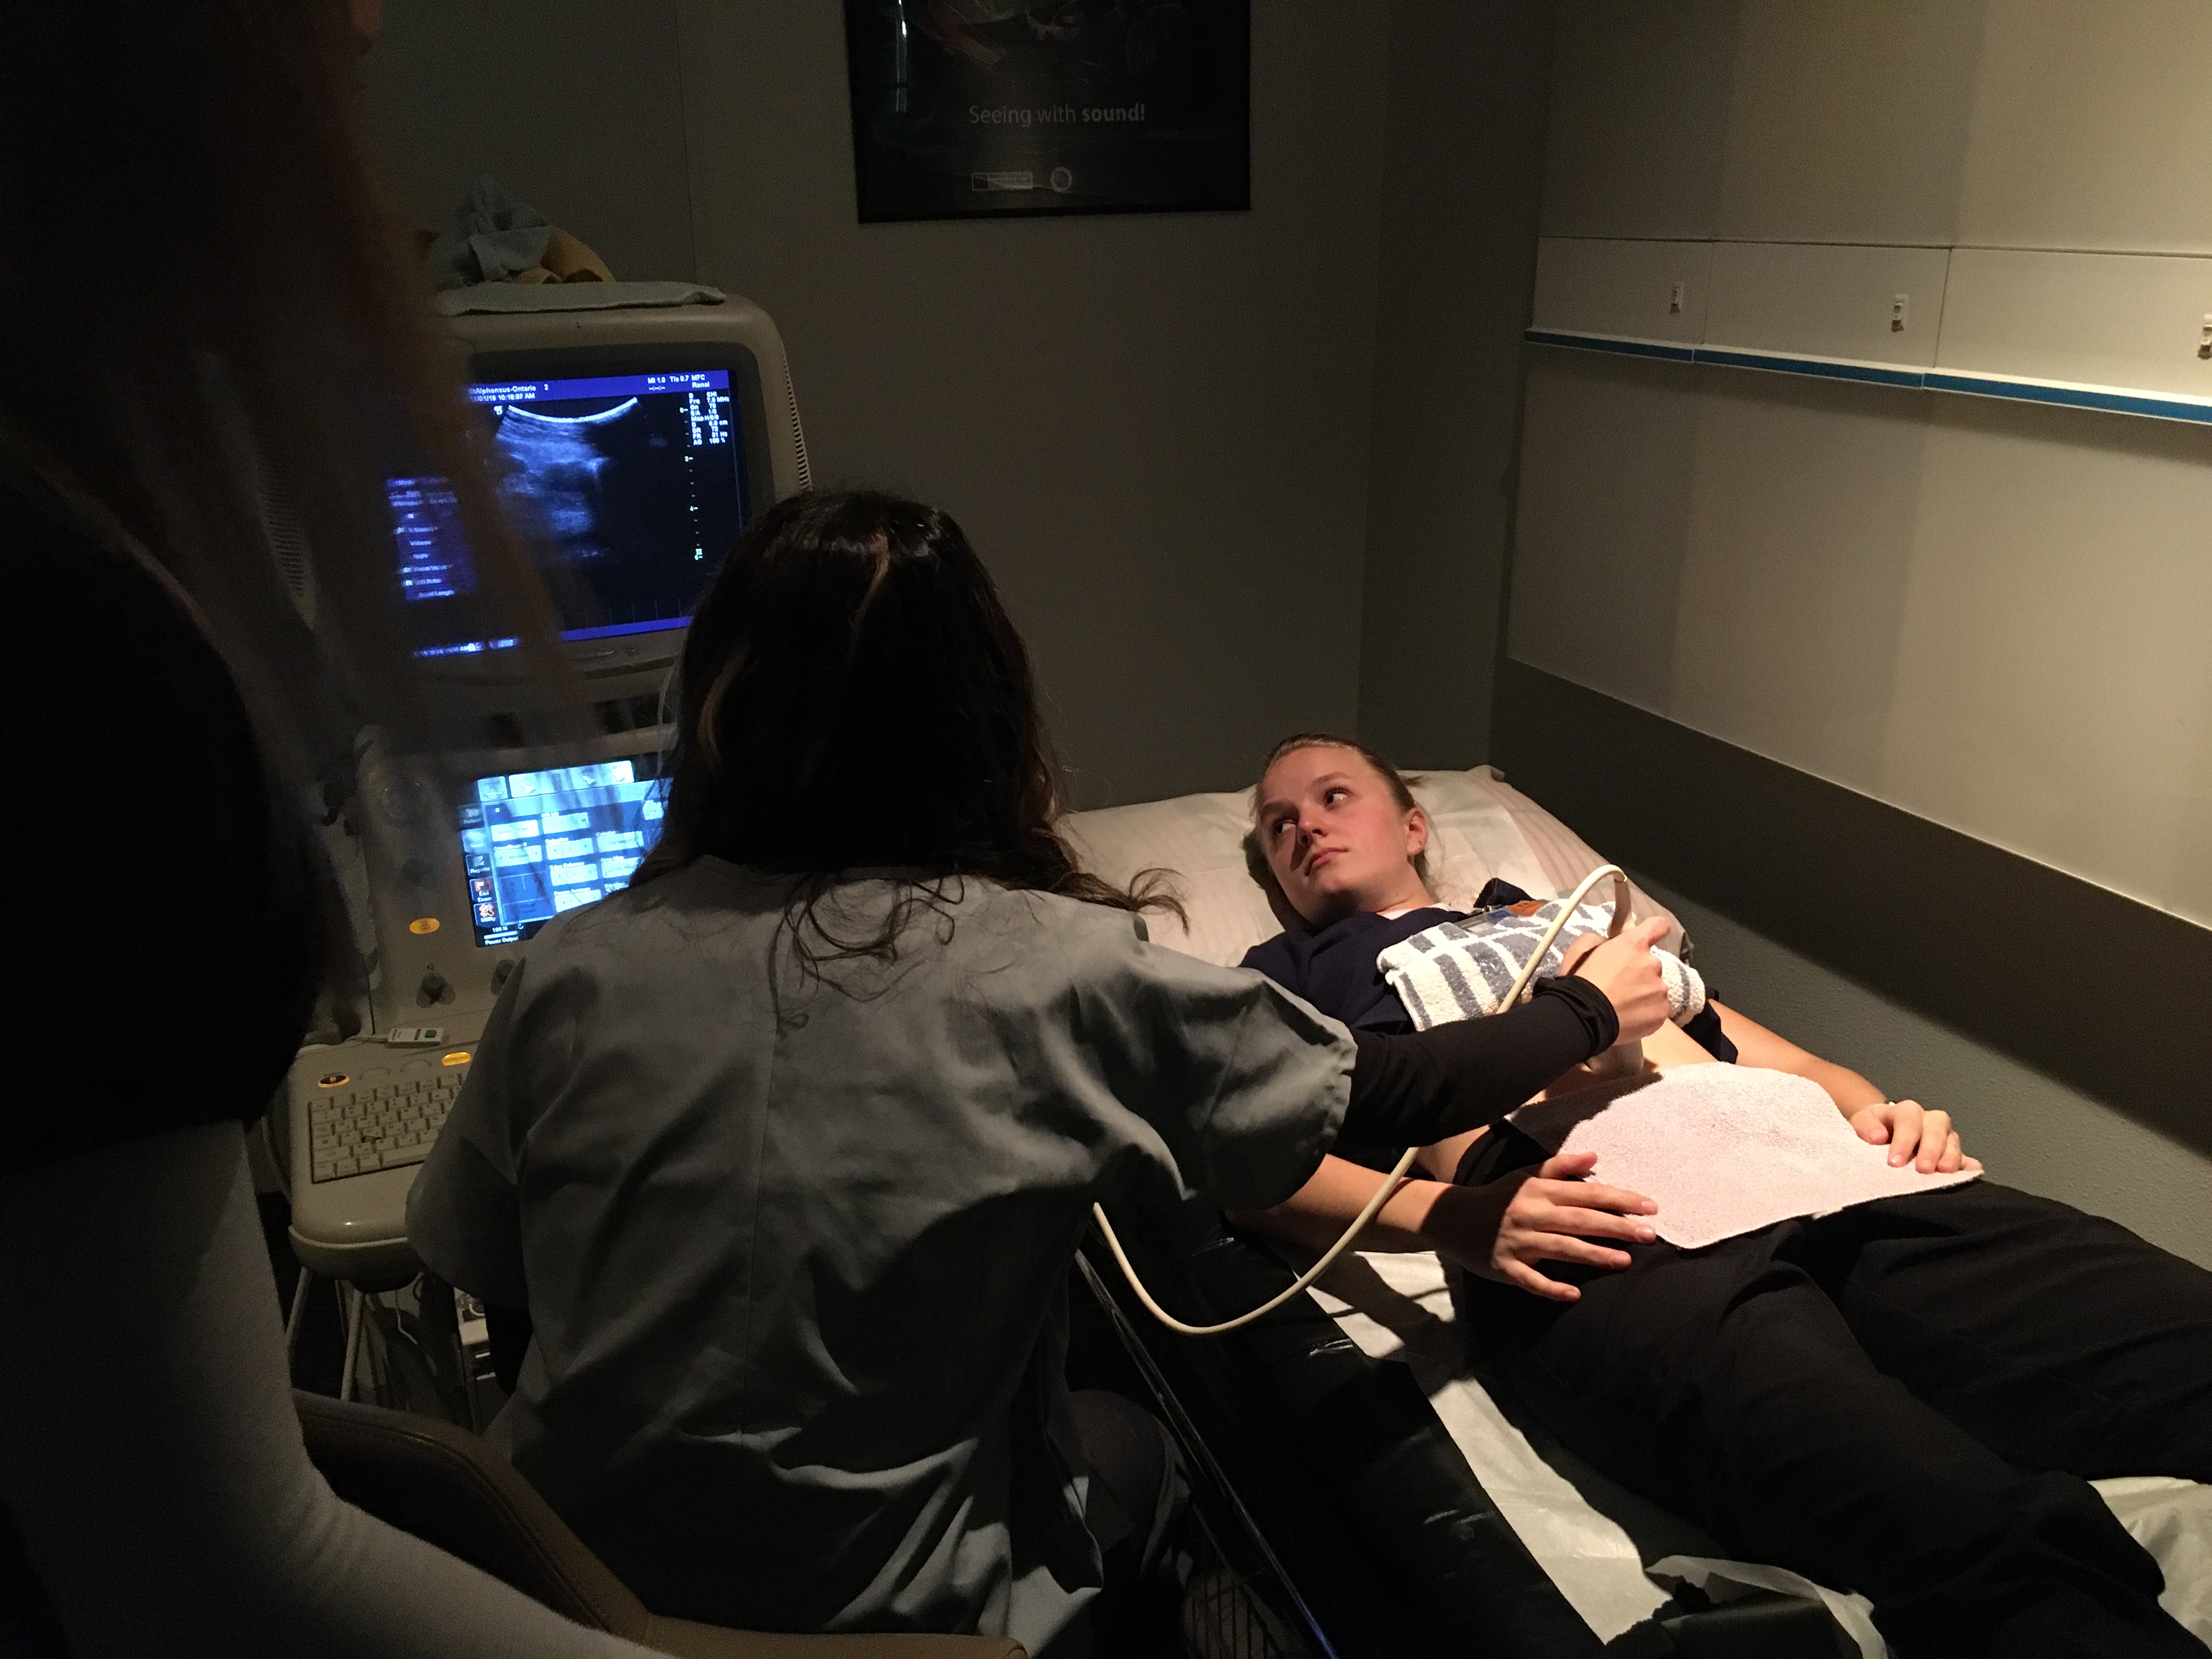 Students touring sonography technology